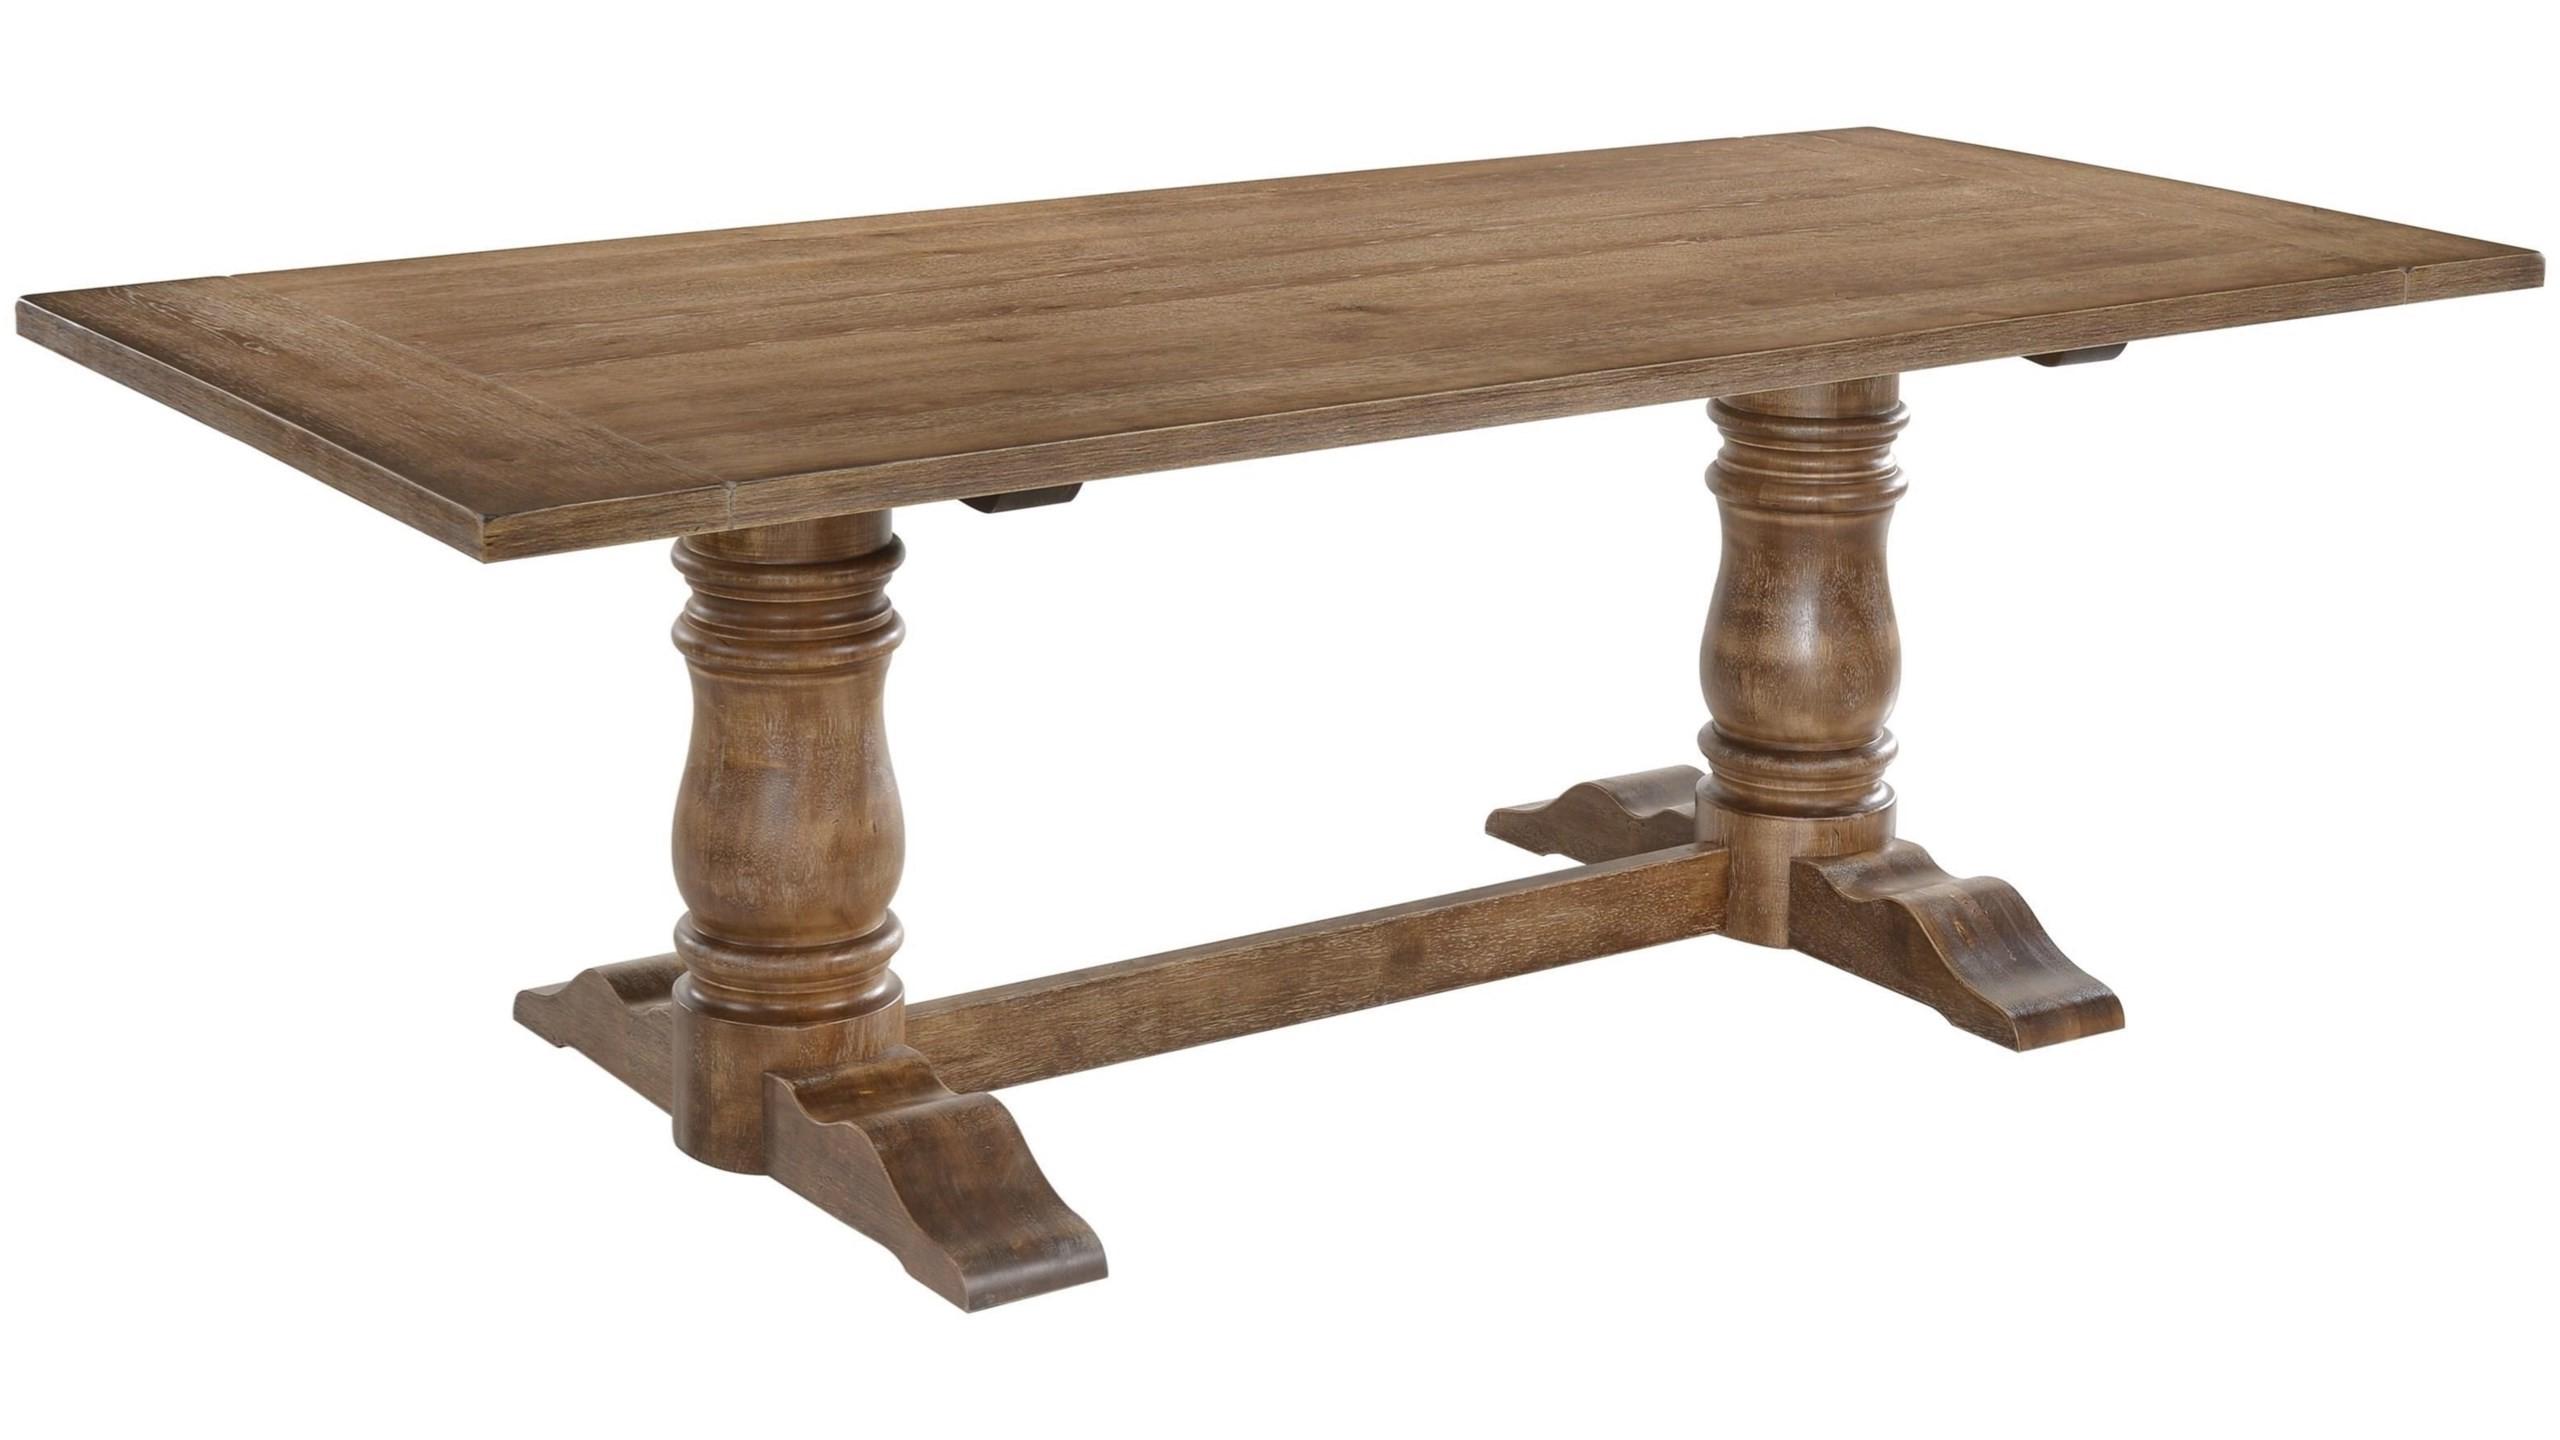 Rustic Dining Table Leventis 74655 in Brown Oak 